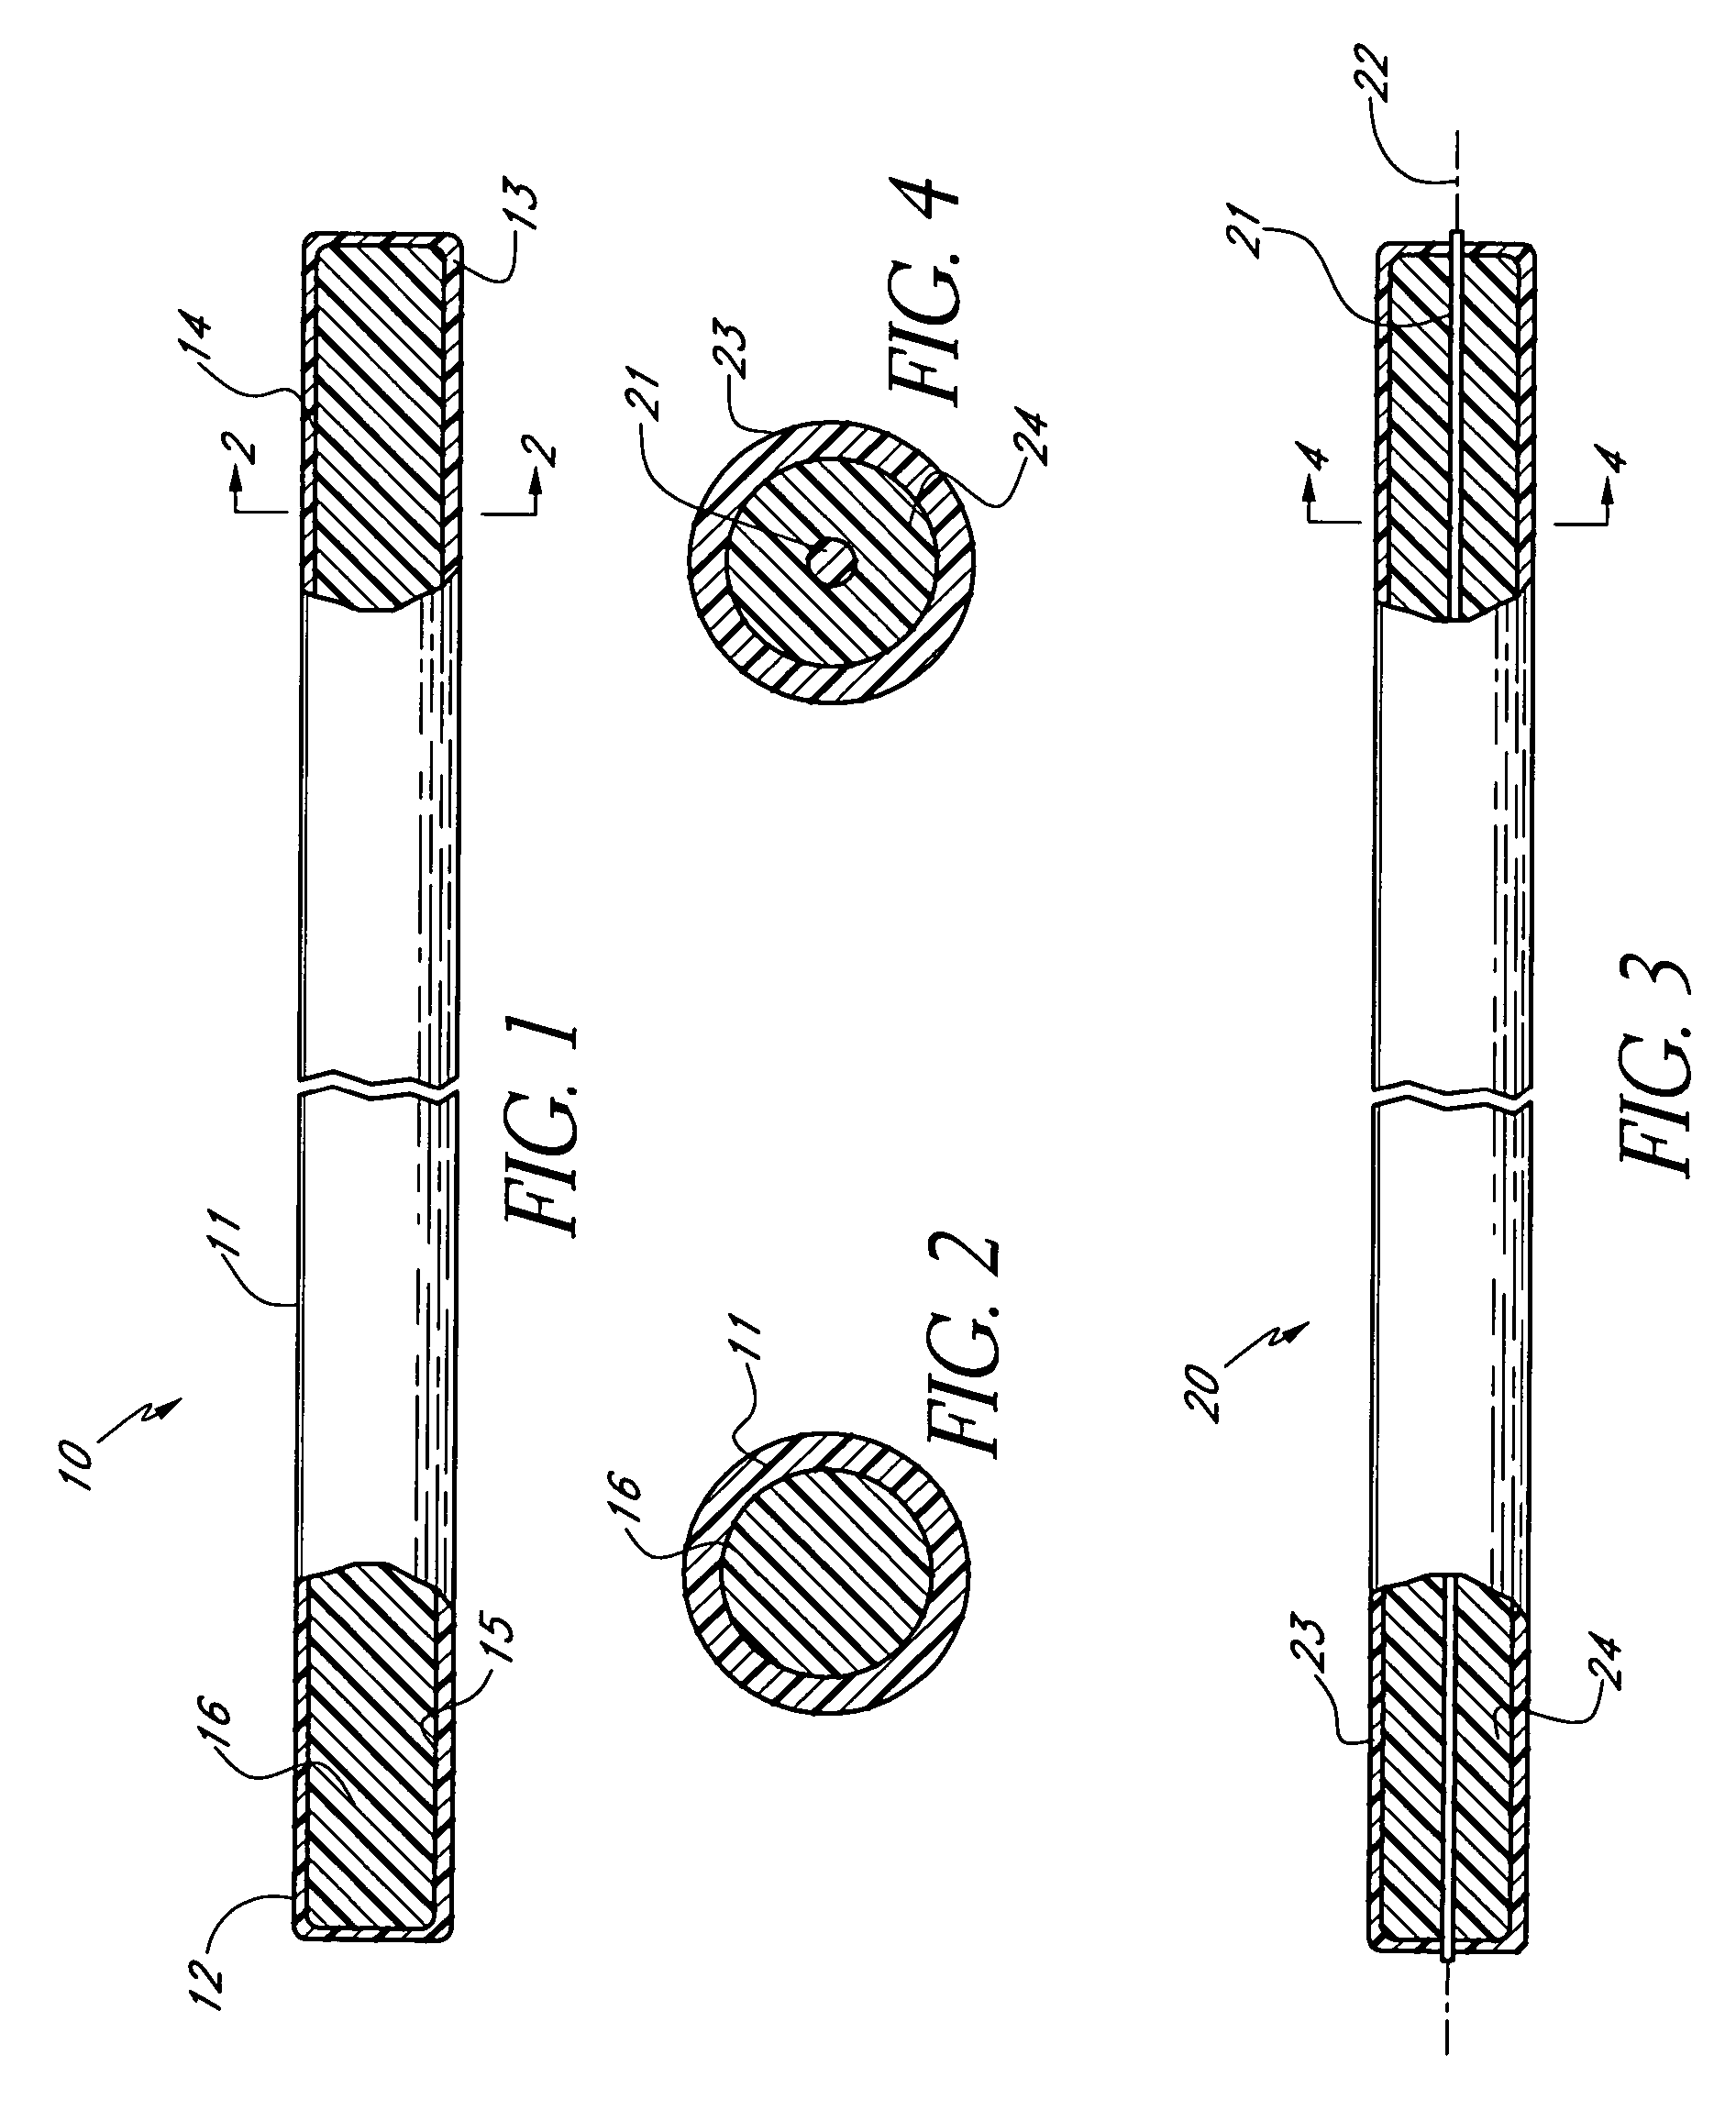 Intracorporeal occlusive device and method